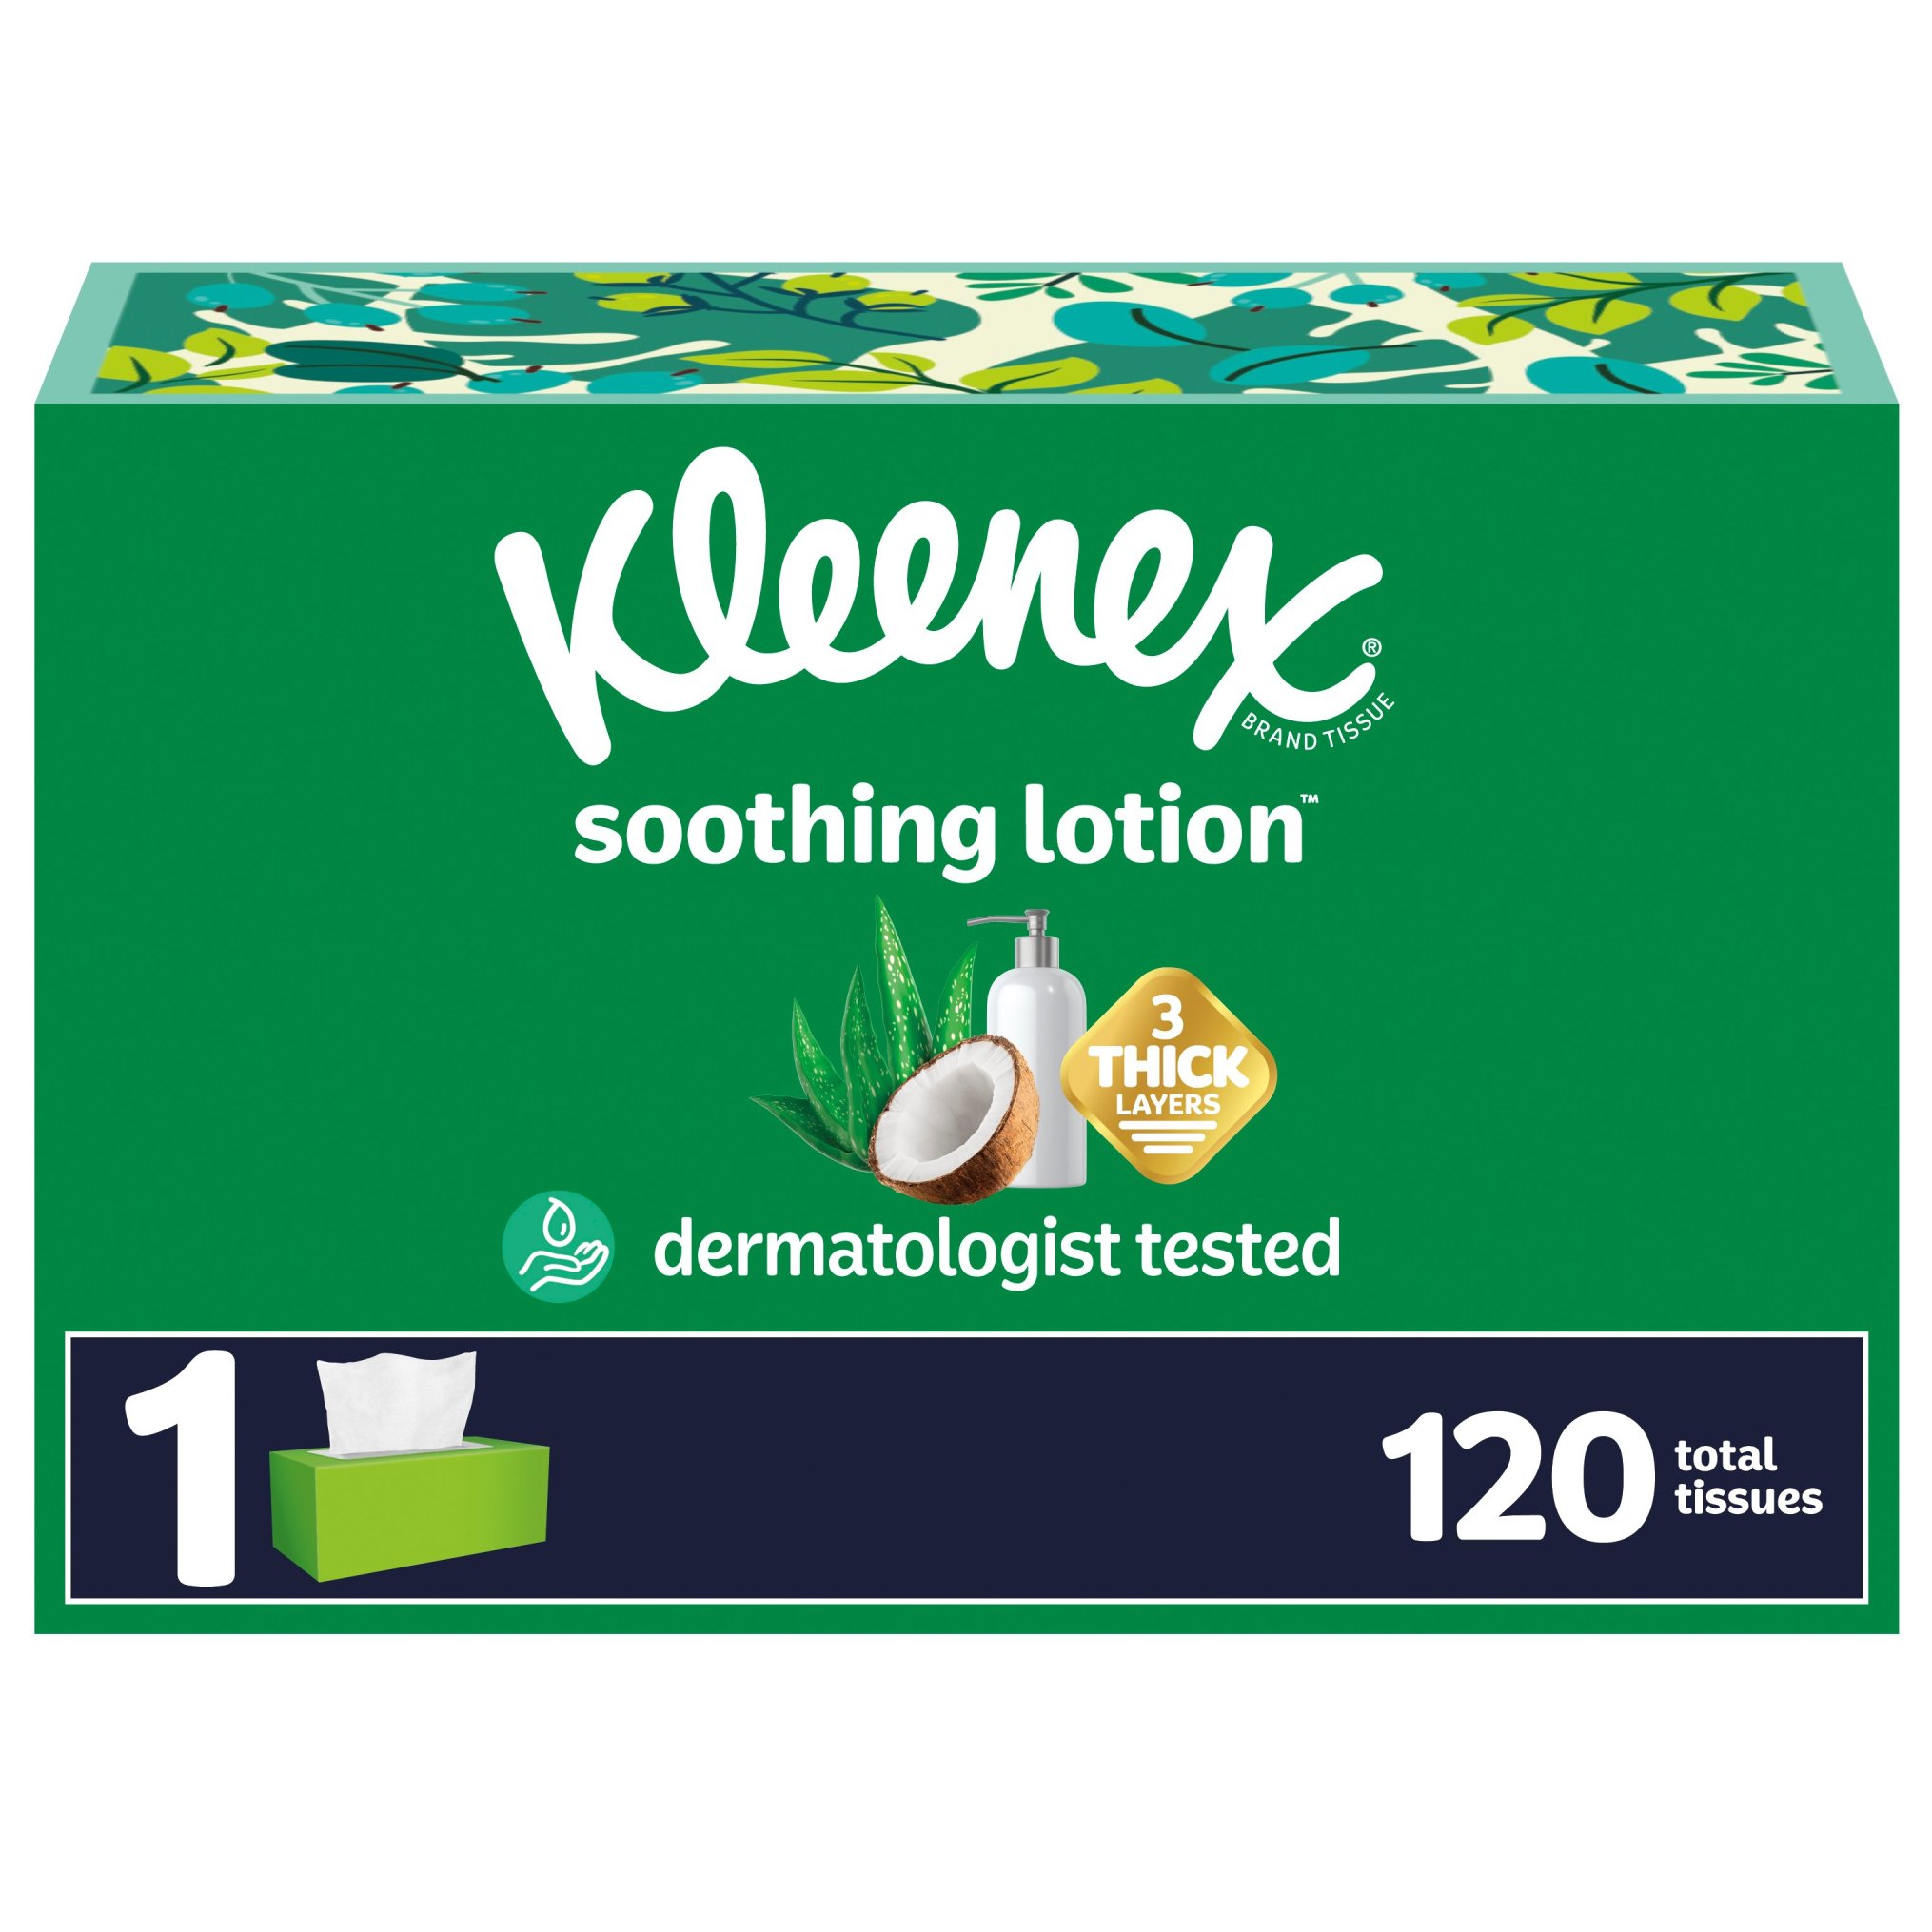 Kleenex Soothing Lotion Facial Tissues with Coconut Oil, Aloe & Vitamin E, 3-Ply, 120 Tissues per Box